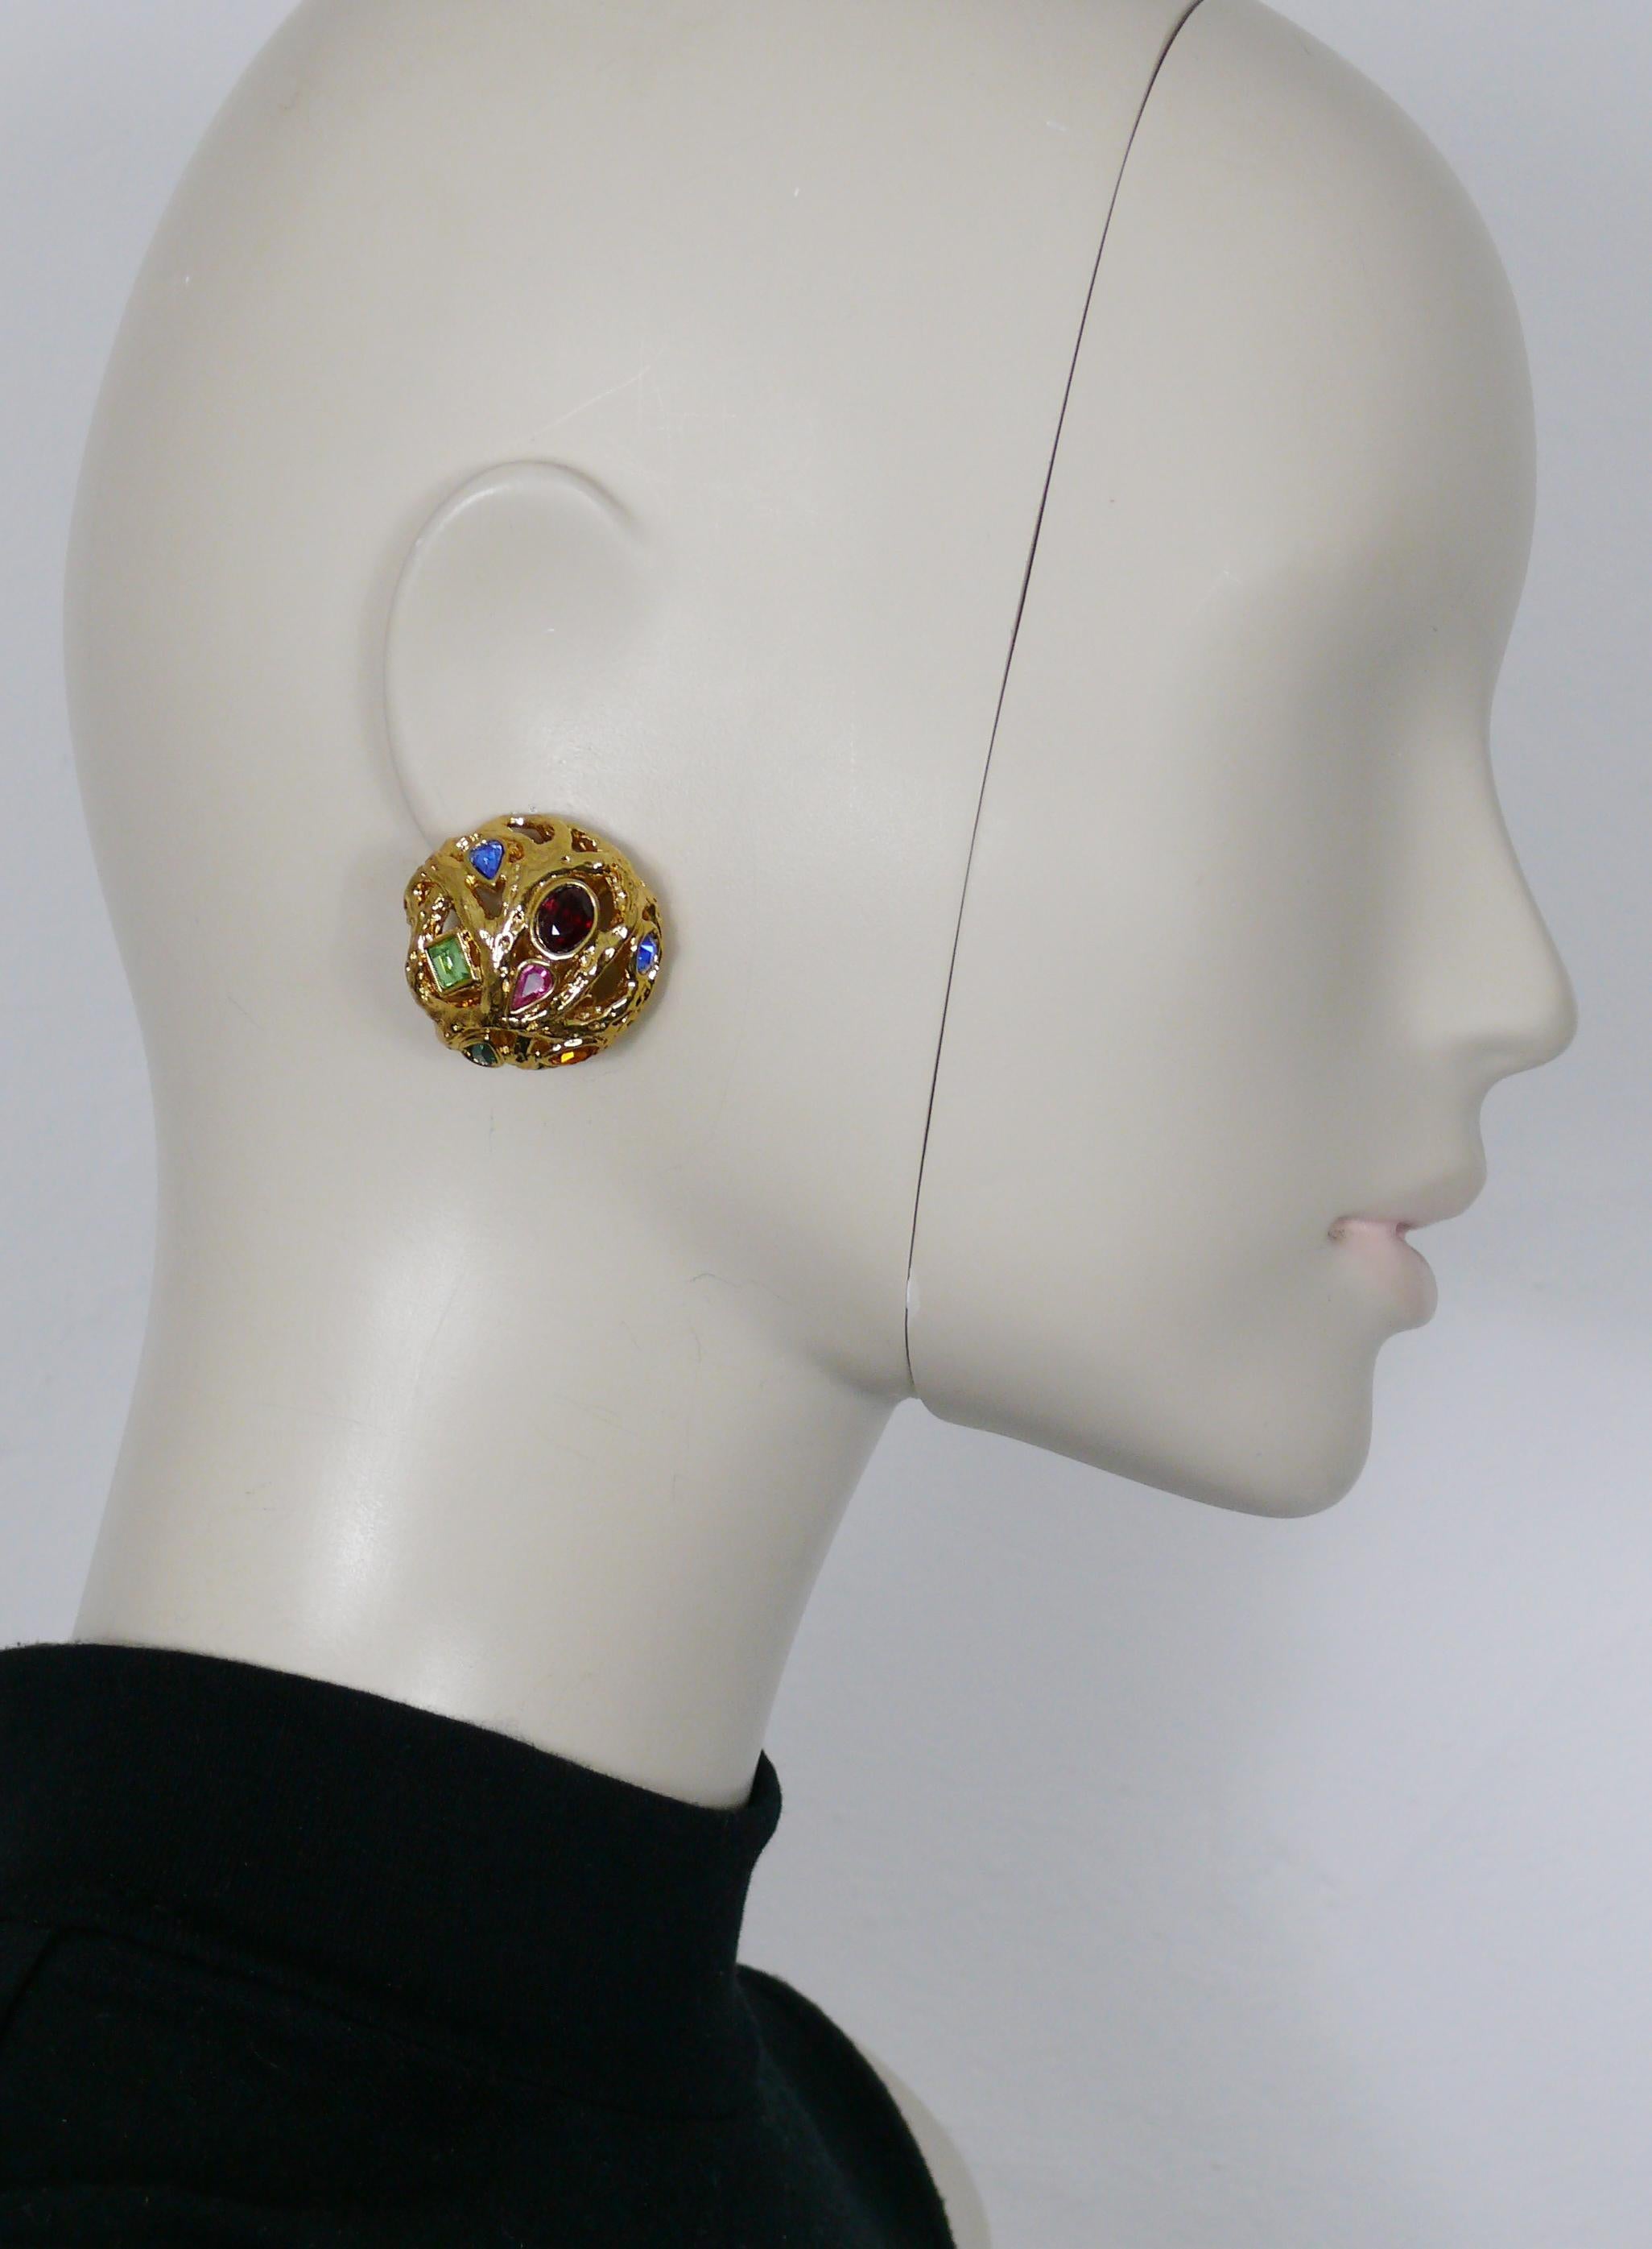 YVES SAINT LAURENT vintage gold tone domed clip-on earrings featuring a gorgeous openwork design of intertwined branches embellished with multicolored crystals.

Embossed YSL Made in France.

Indicative measurements : diameter approx. 3 cm (1.18